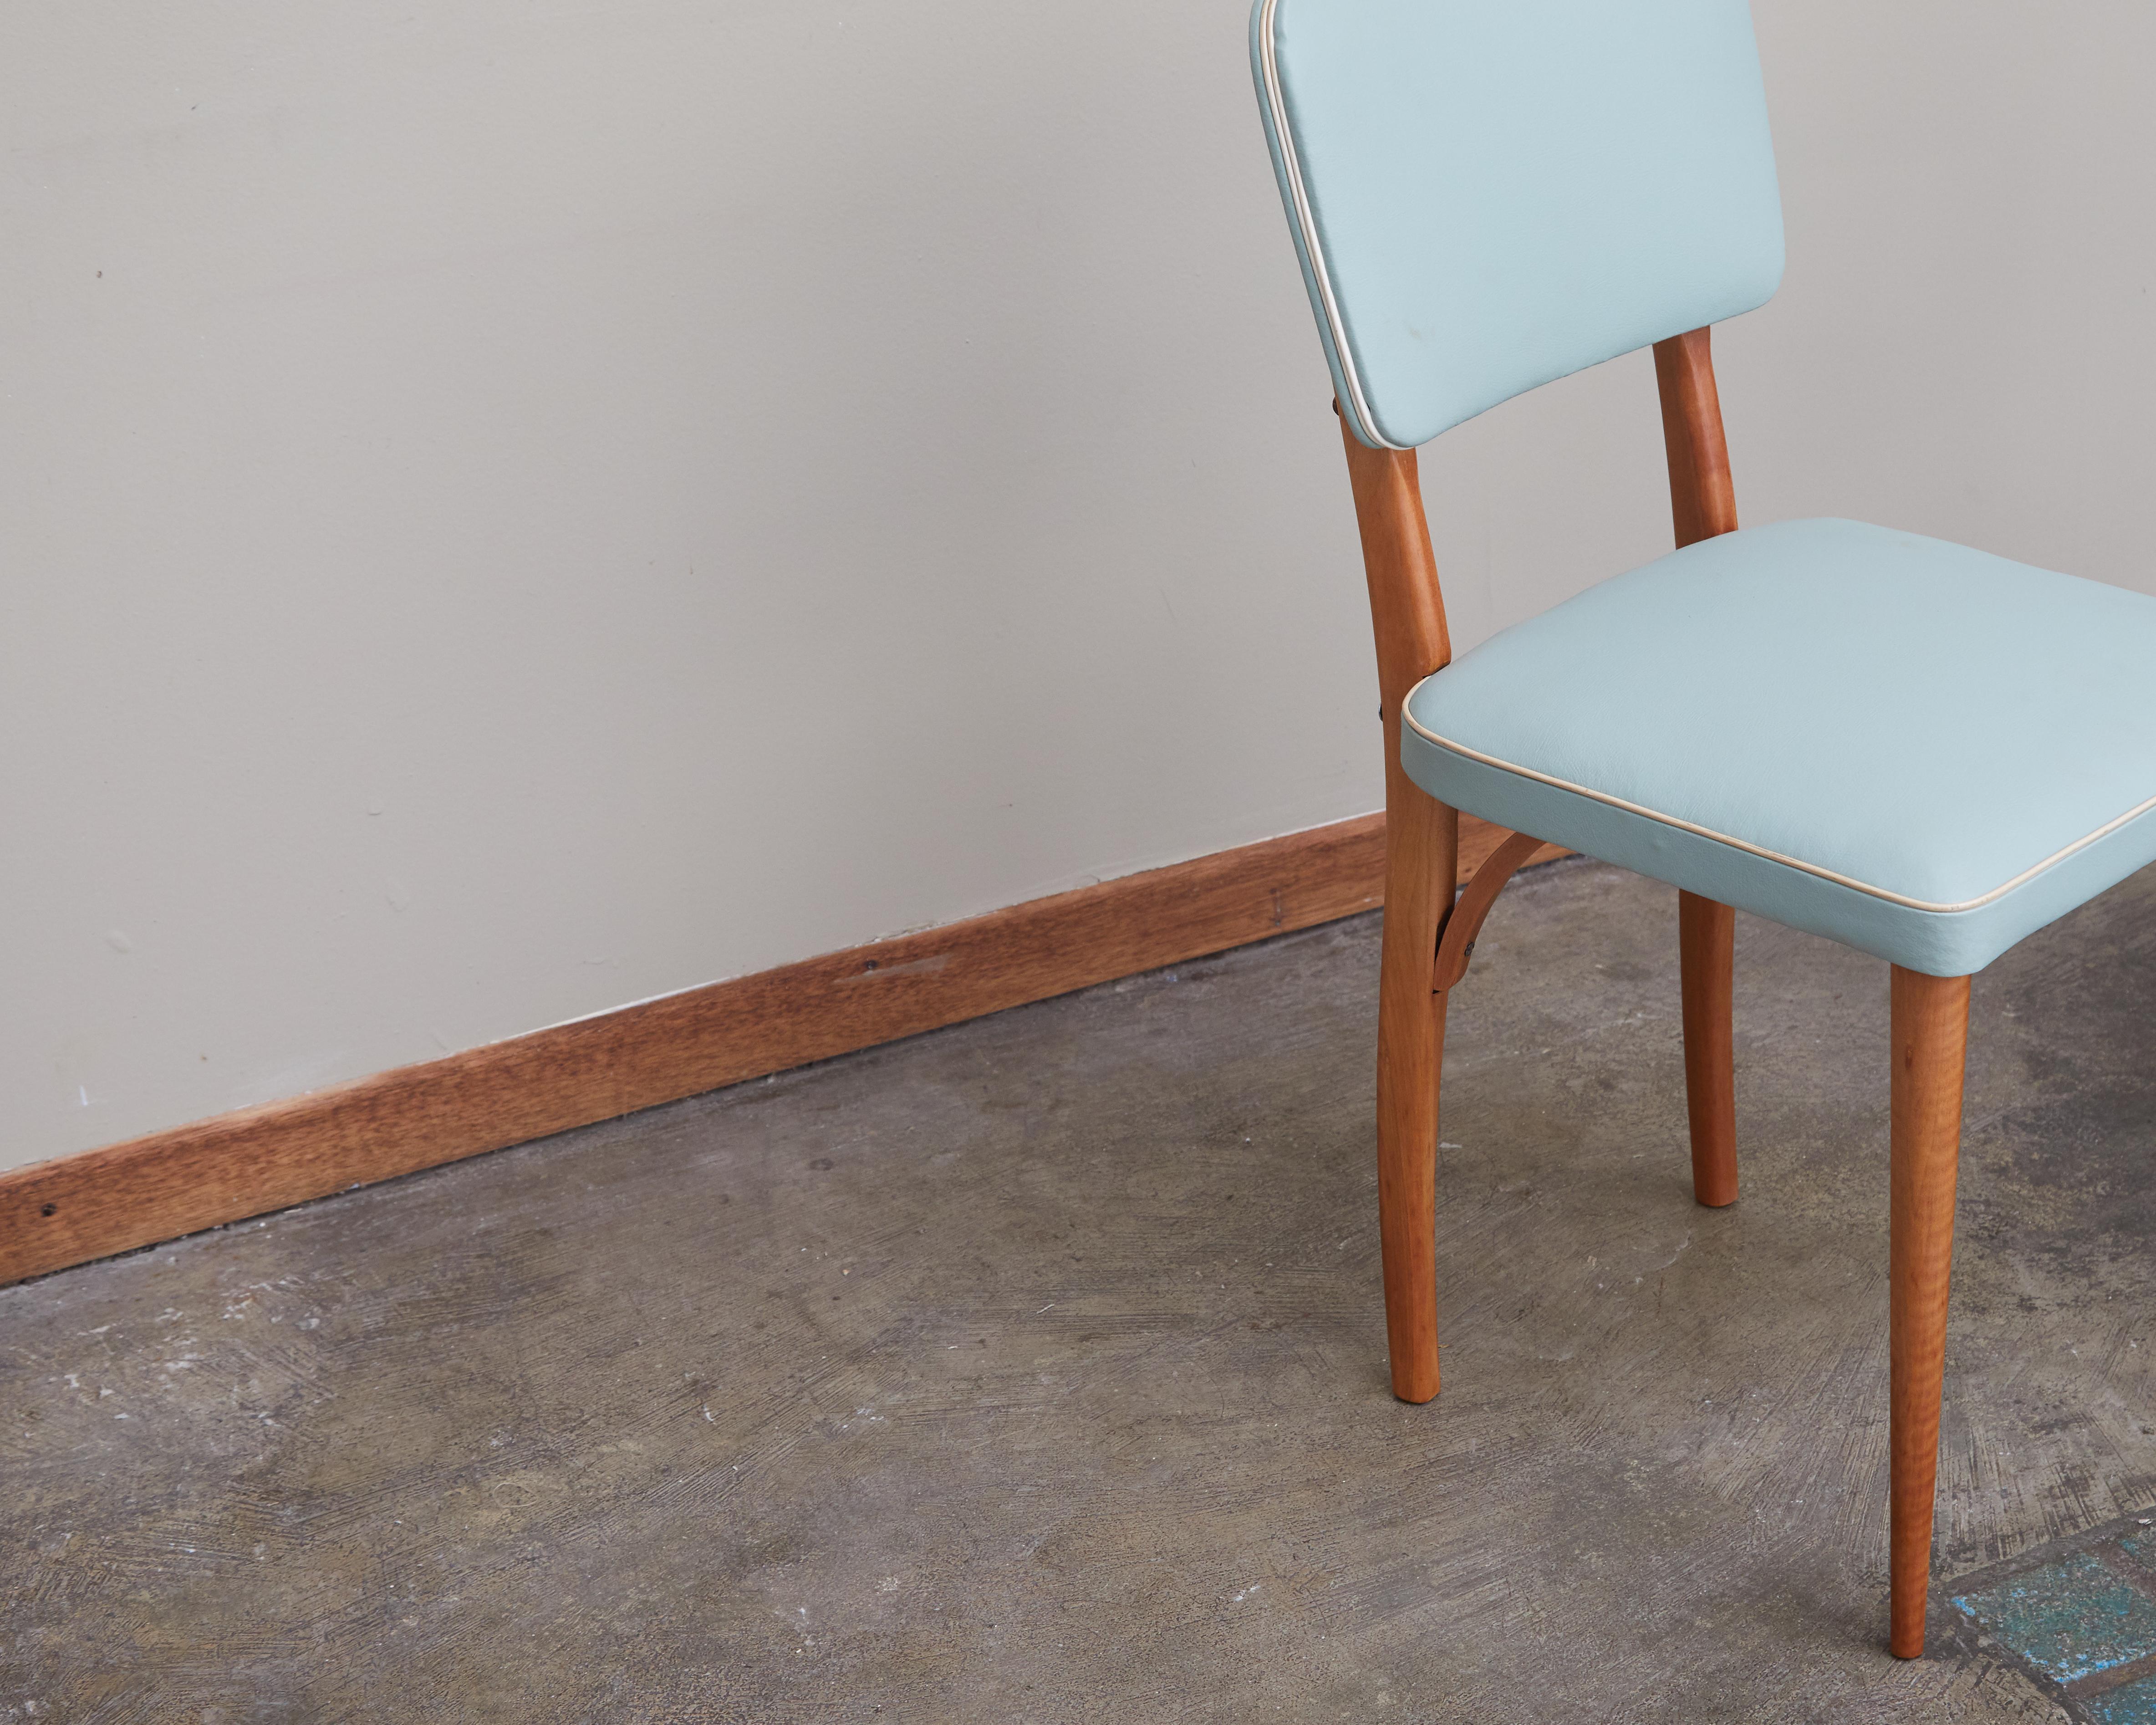 Upholstery Brazilian Mid-century Chairs by Industria Cama Patente